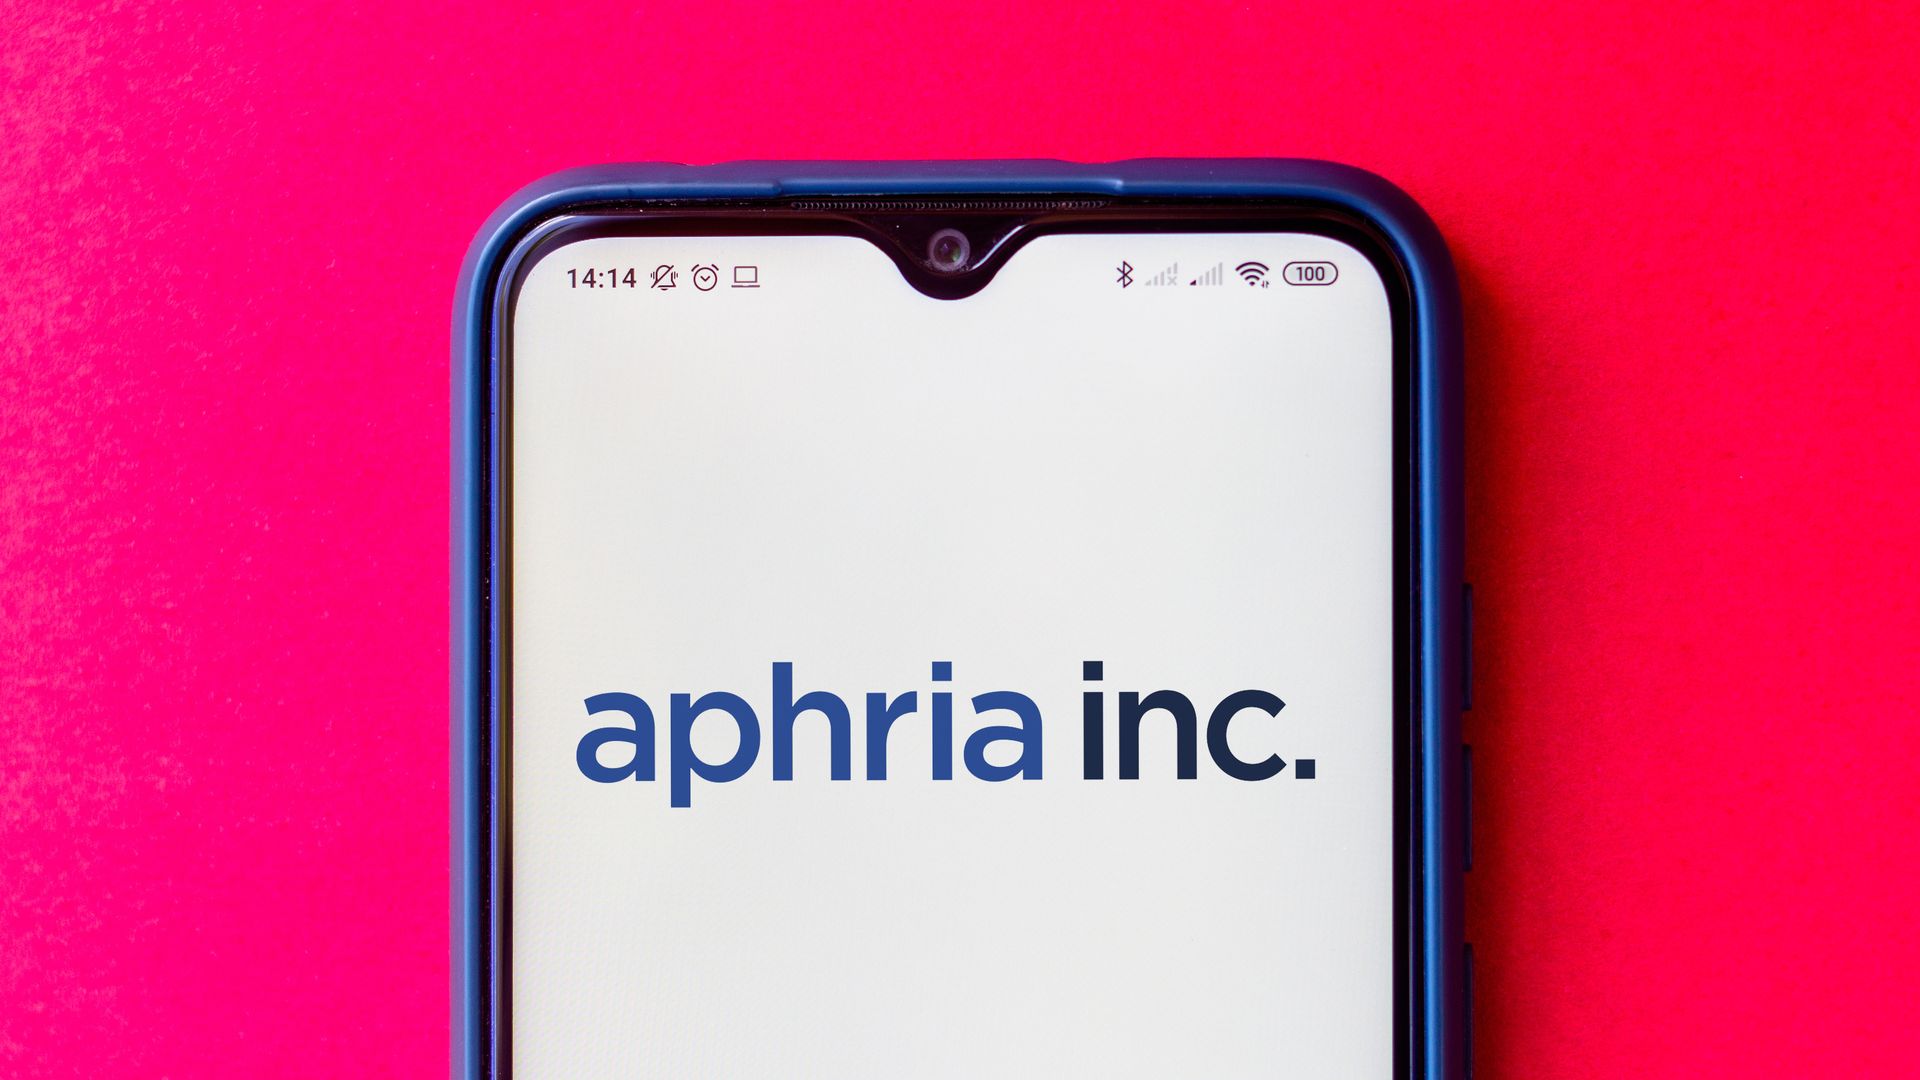 Photo of a phone screen with the words "aphric inc" 